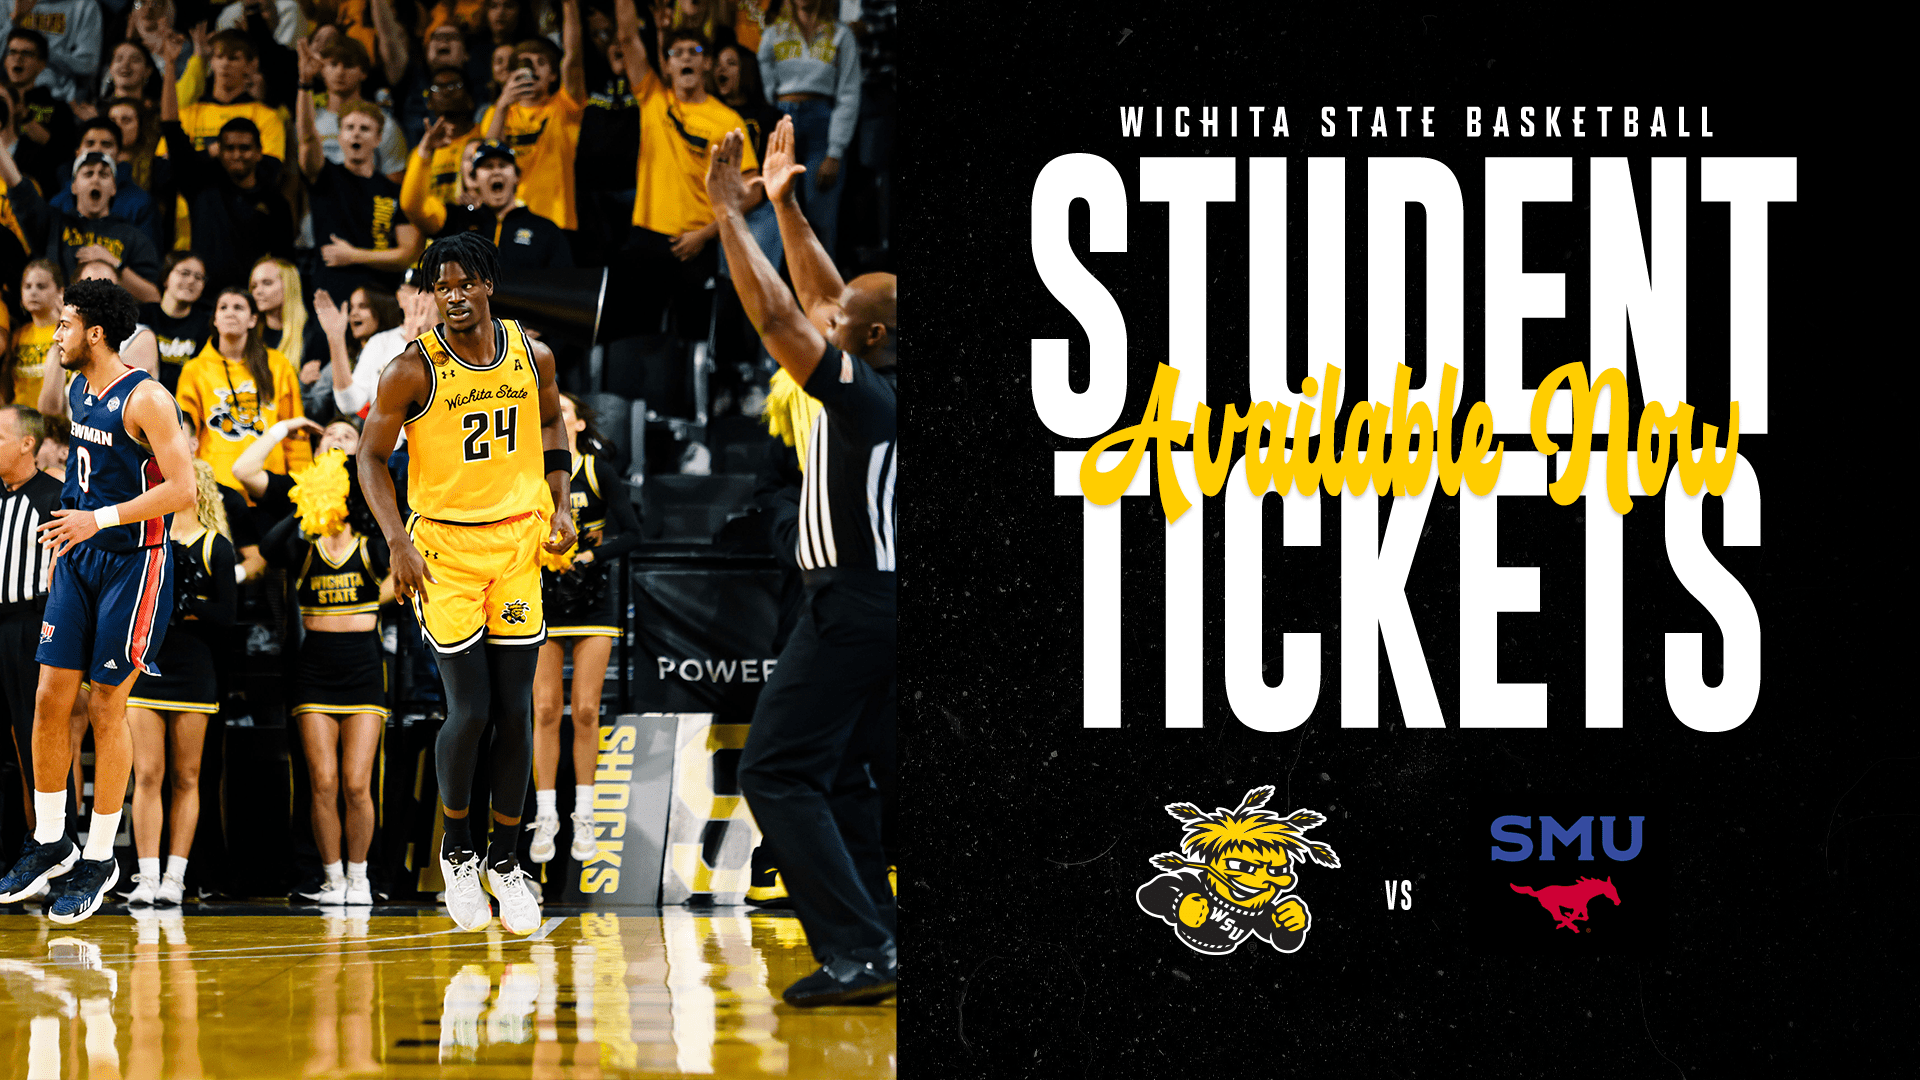 Photo of Isaac Abidde from the men's basketball team with the text "Wichita State Basketball Student Tickets Available Now; Shockers vs SMU"